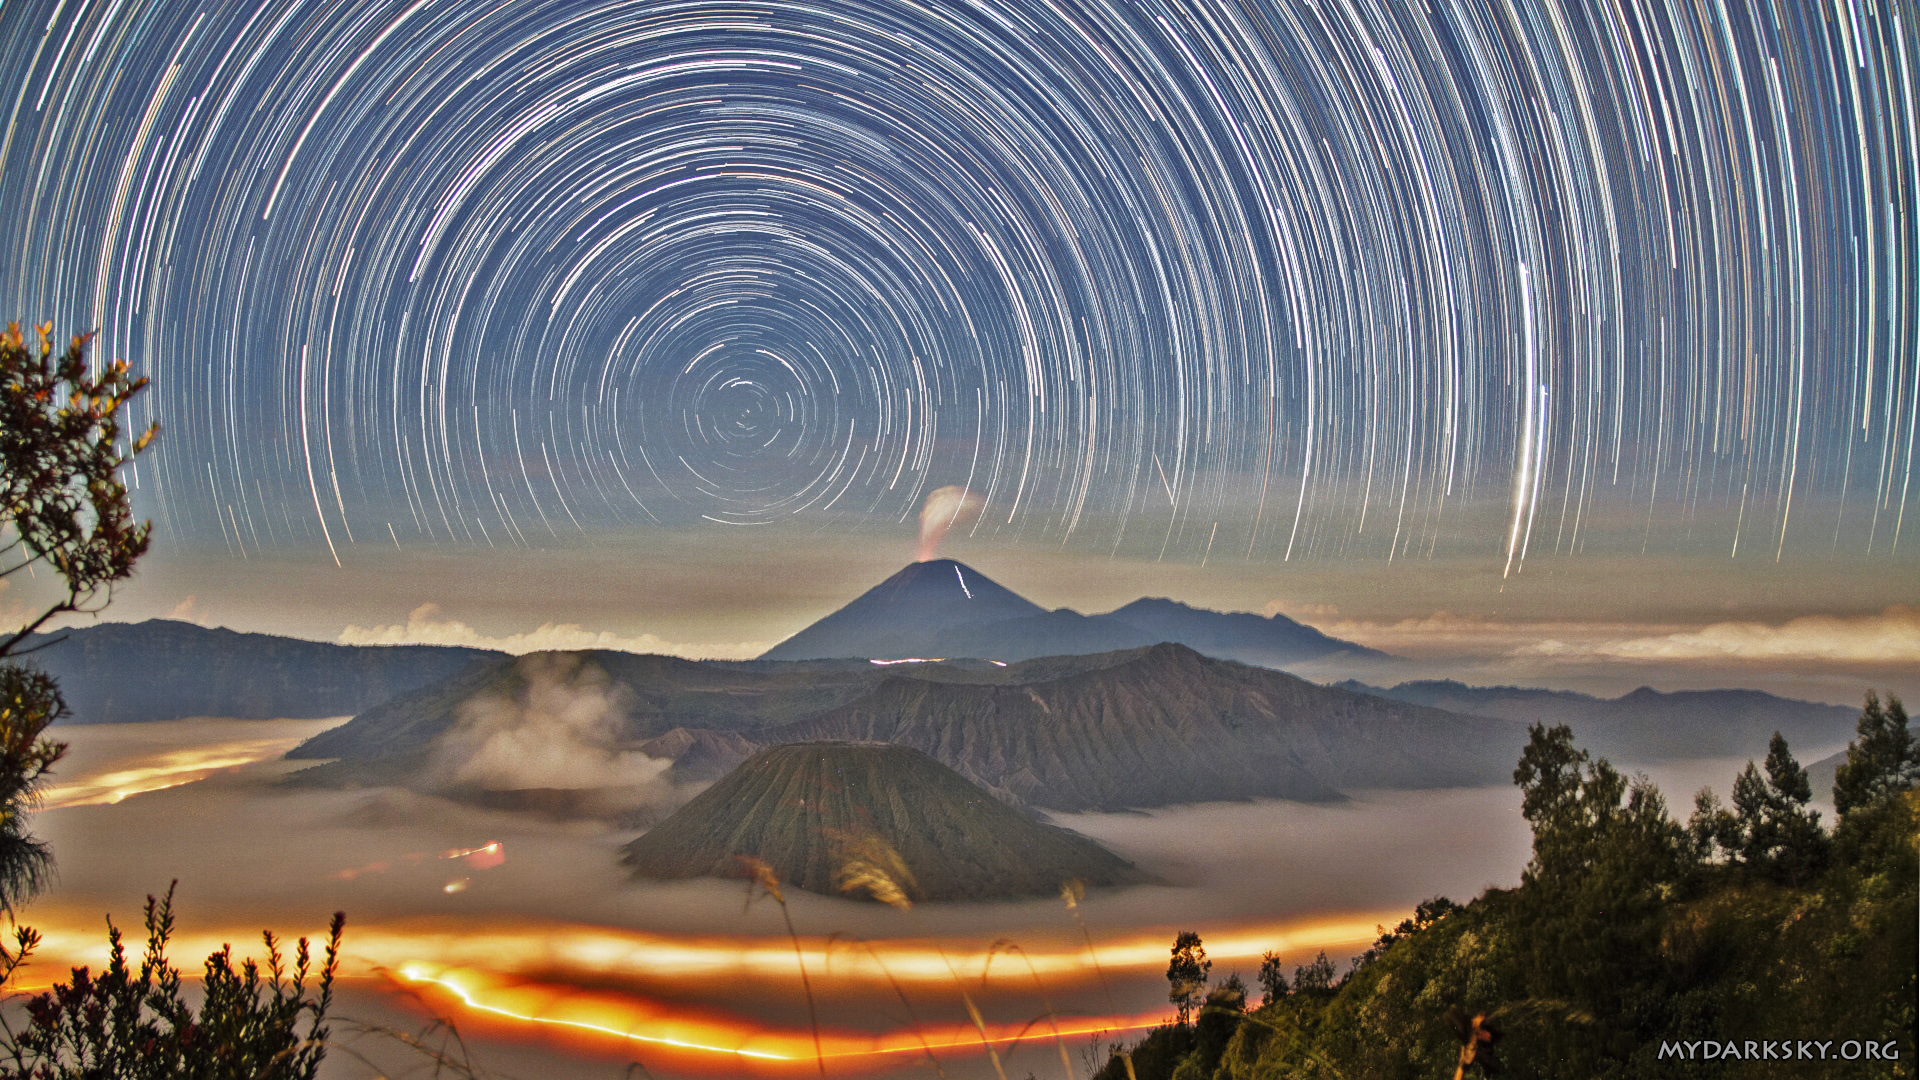 A Stunning Star Trail Photo Featuring Active Volcanoes Mount Semeru and